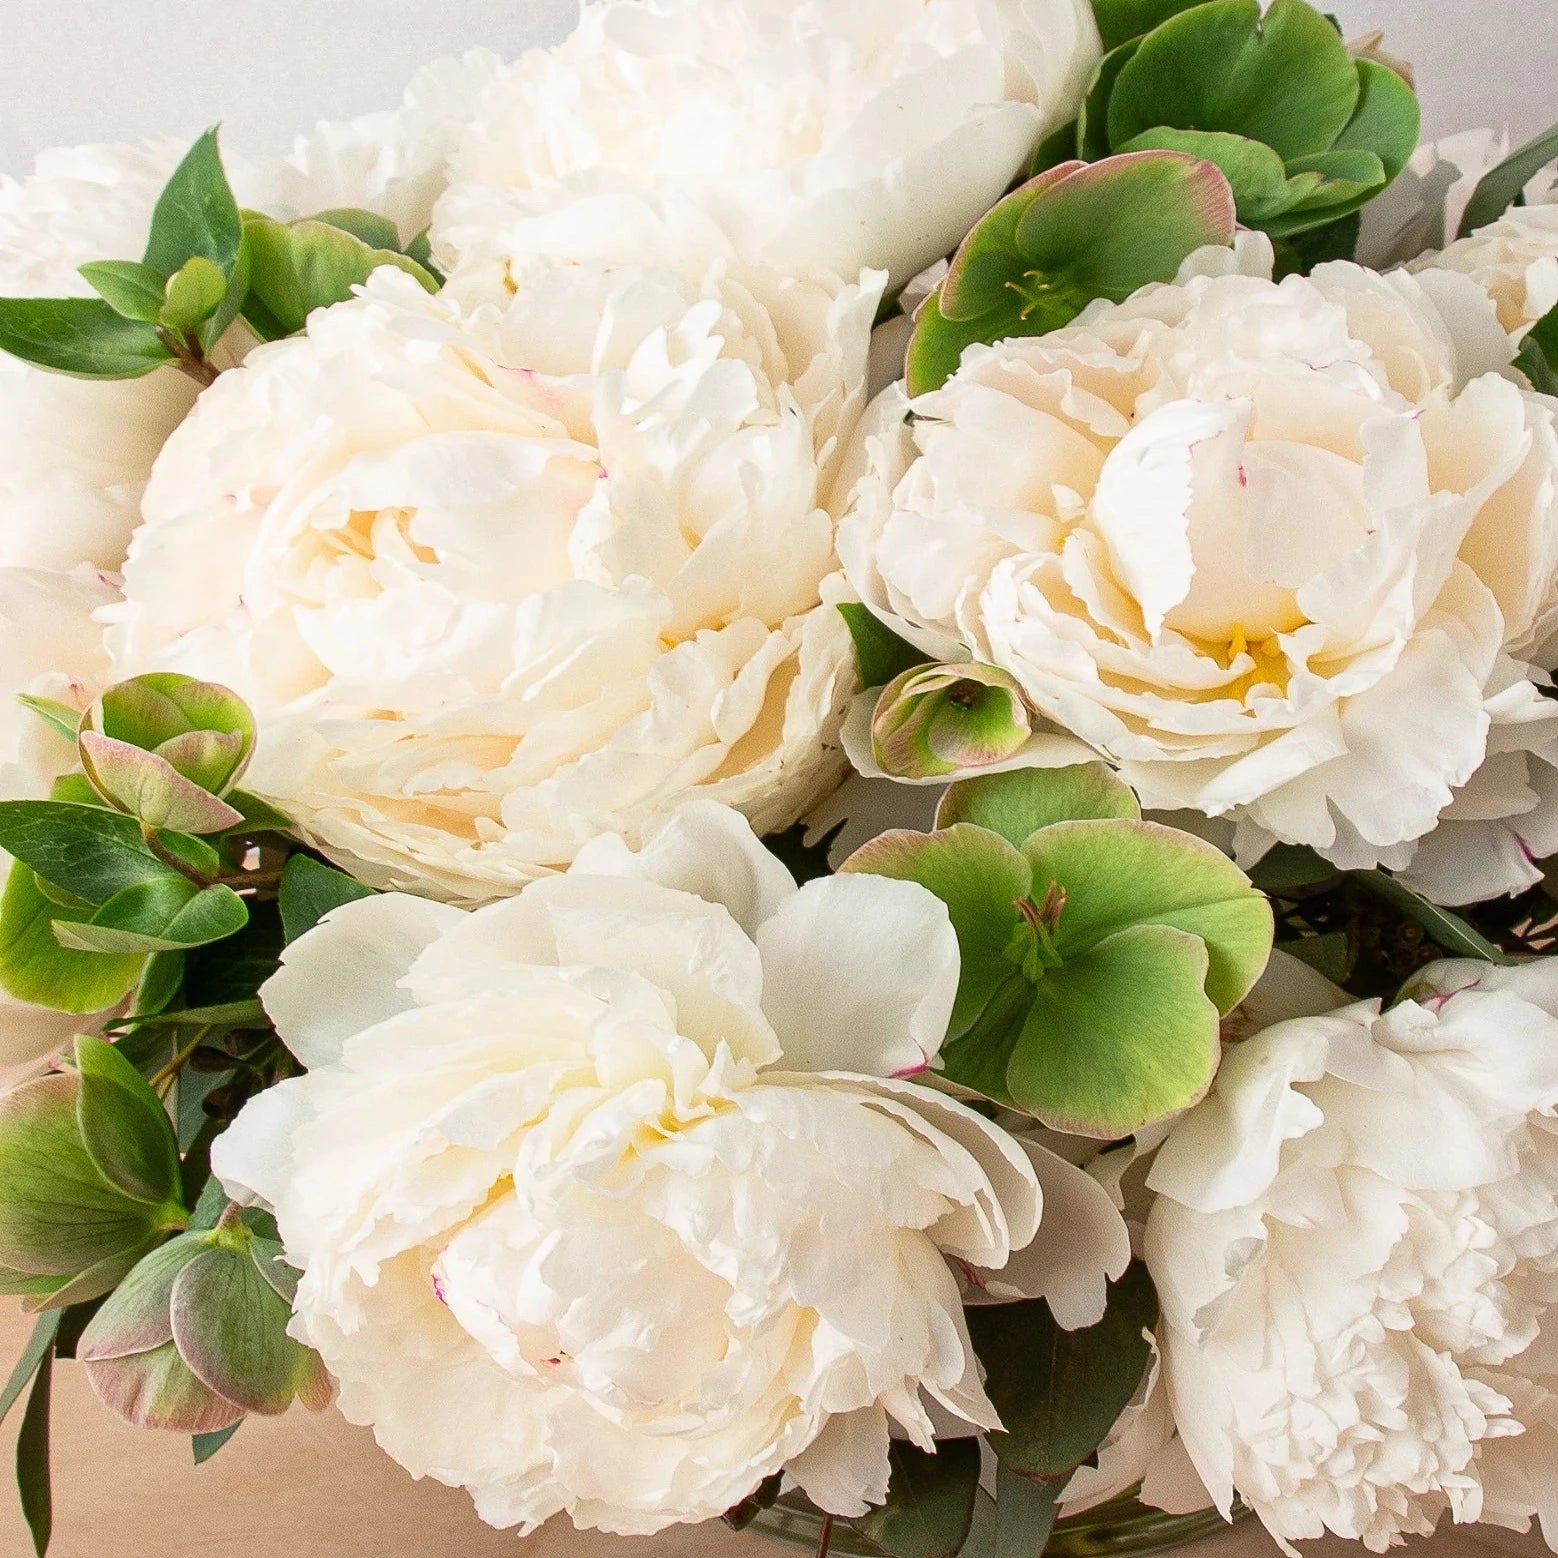 Our Classy Peonies arrangement features a luscious vase of Cream peonies and is made with luxury, richness, and elegance. Hellebores and seeded eucalyptus are accented in a clear glass vase.